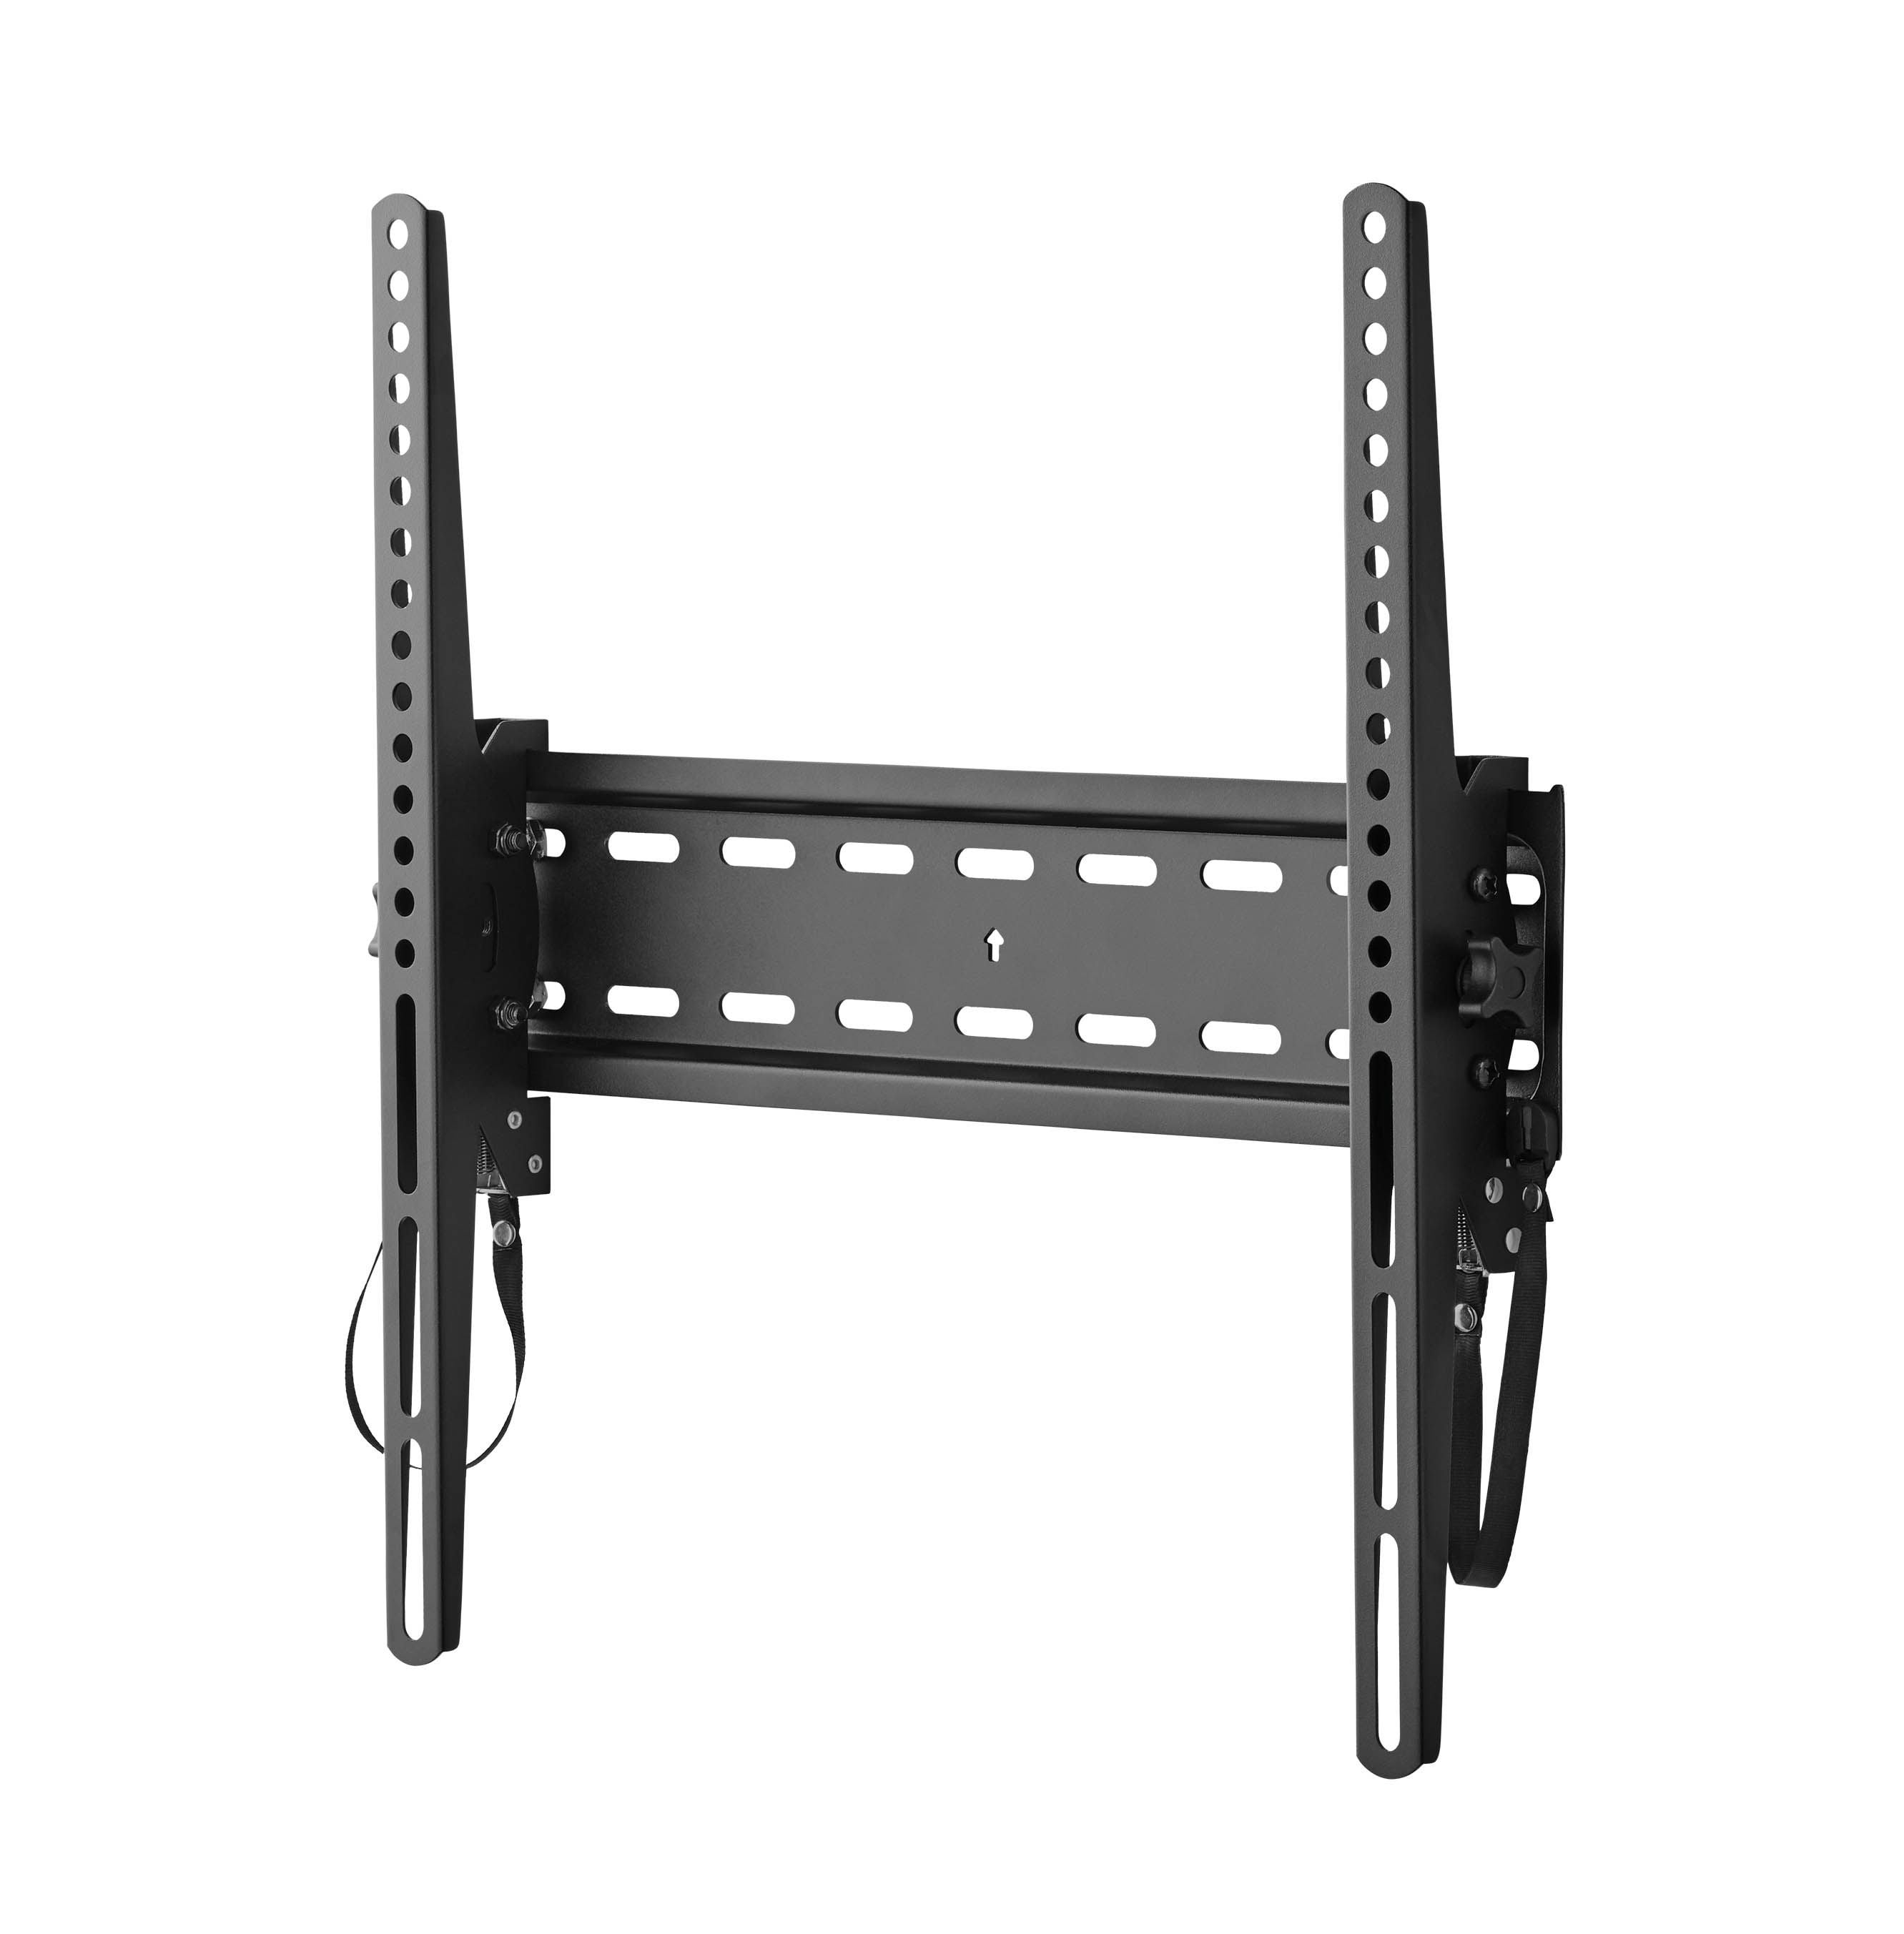 ONN ONA17TM011 TV Wall Mount Large Tilting for 47"-80" TVs up to 130 lbs Black